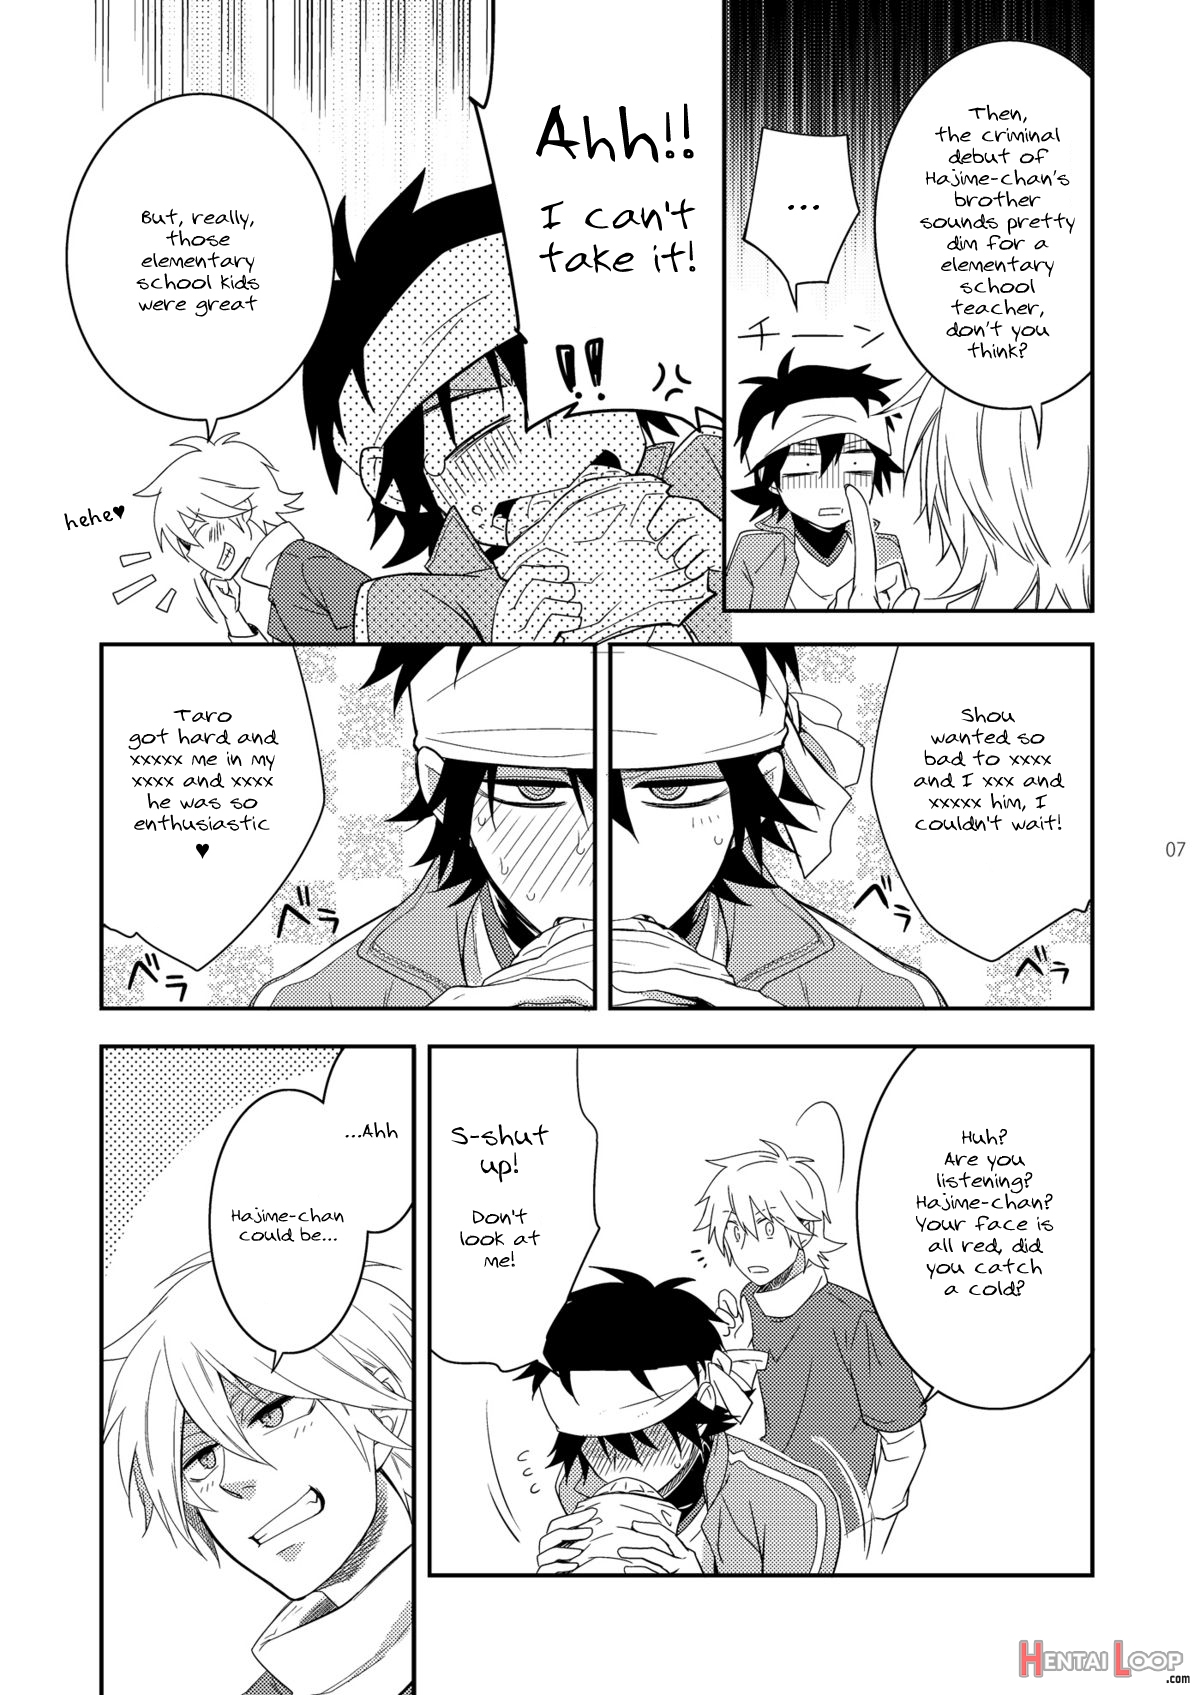 Hajime-sensei And The Adult Health And Physical Education 2 page 6